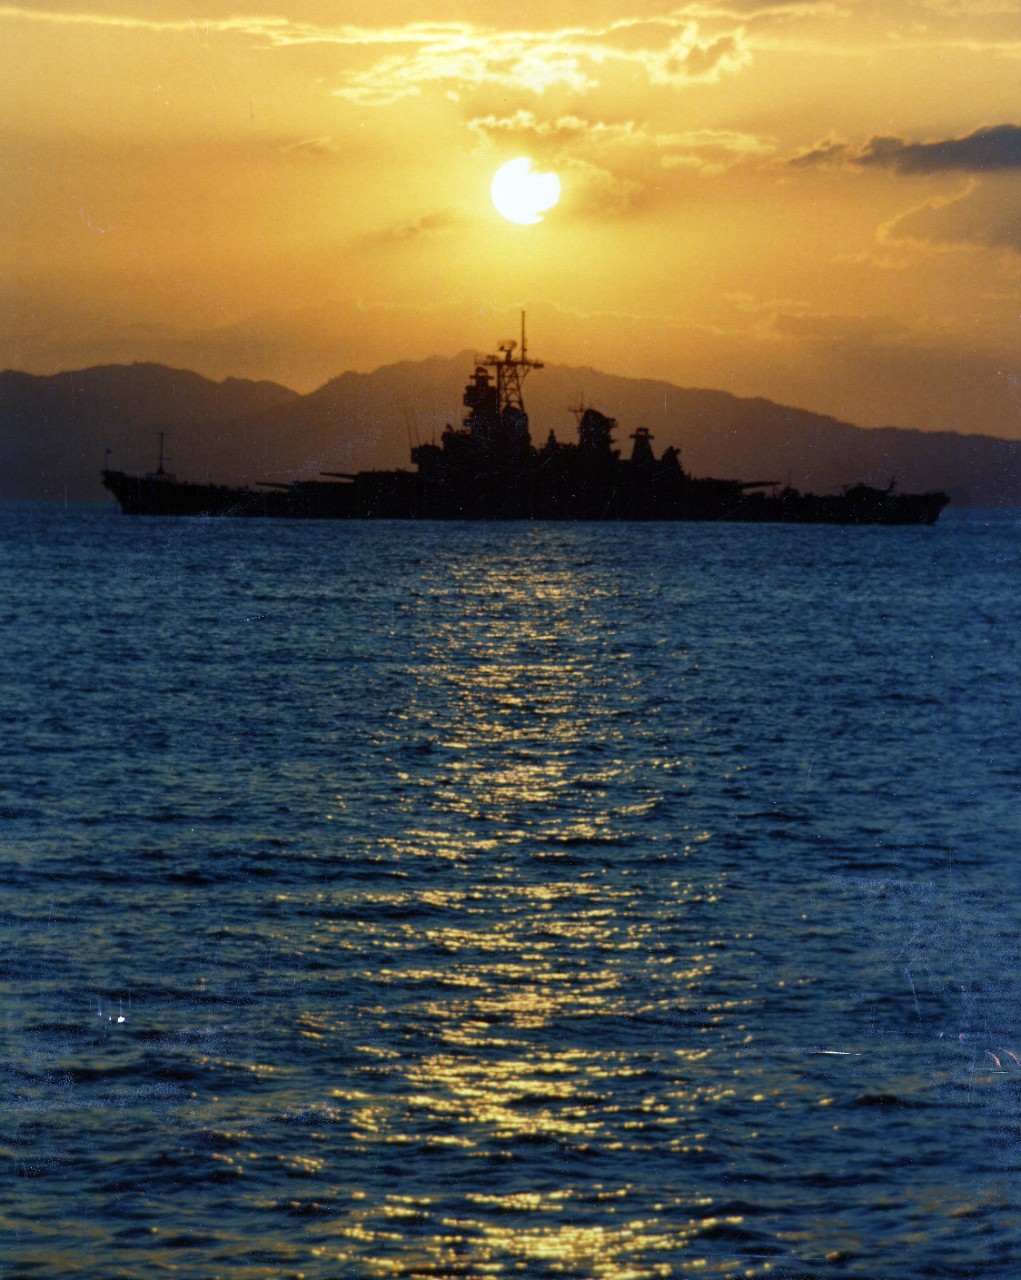 330-CFD-DN-ST-87-03463:   USS Iowa (BB 61), 1986.   USS Iowa with the sun setting behind port side of ship while moored off Puerto Caldera, Costa Rica, 1 March 1986.   Photographed by PH1 Jeff Hilton.  NHHC Photograph Collection, Navy Subject Files, Ships.